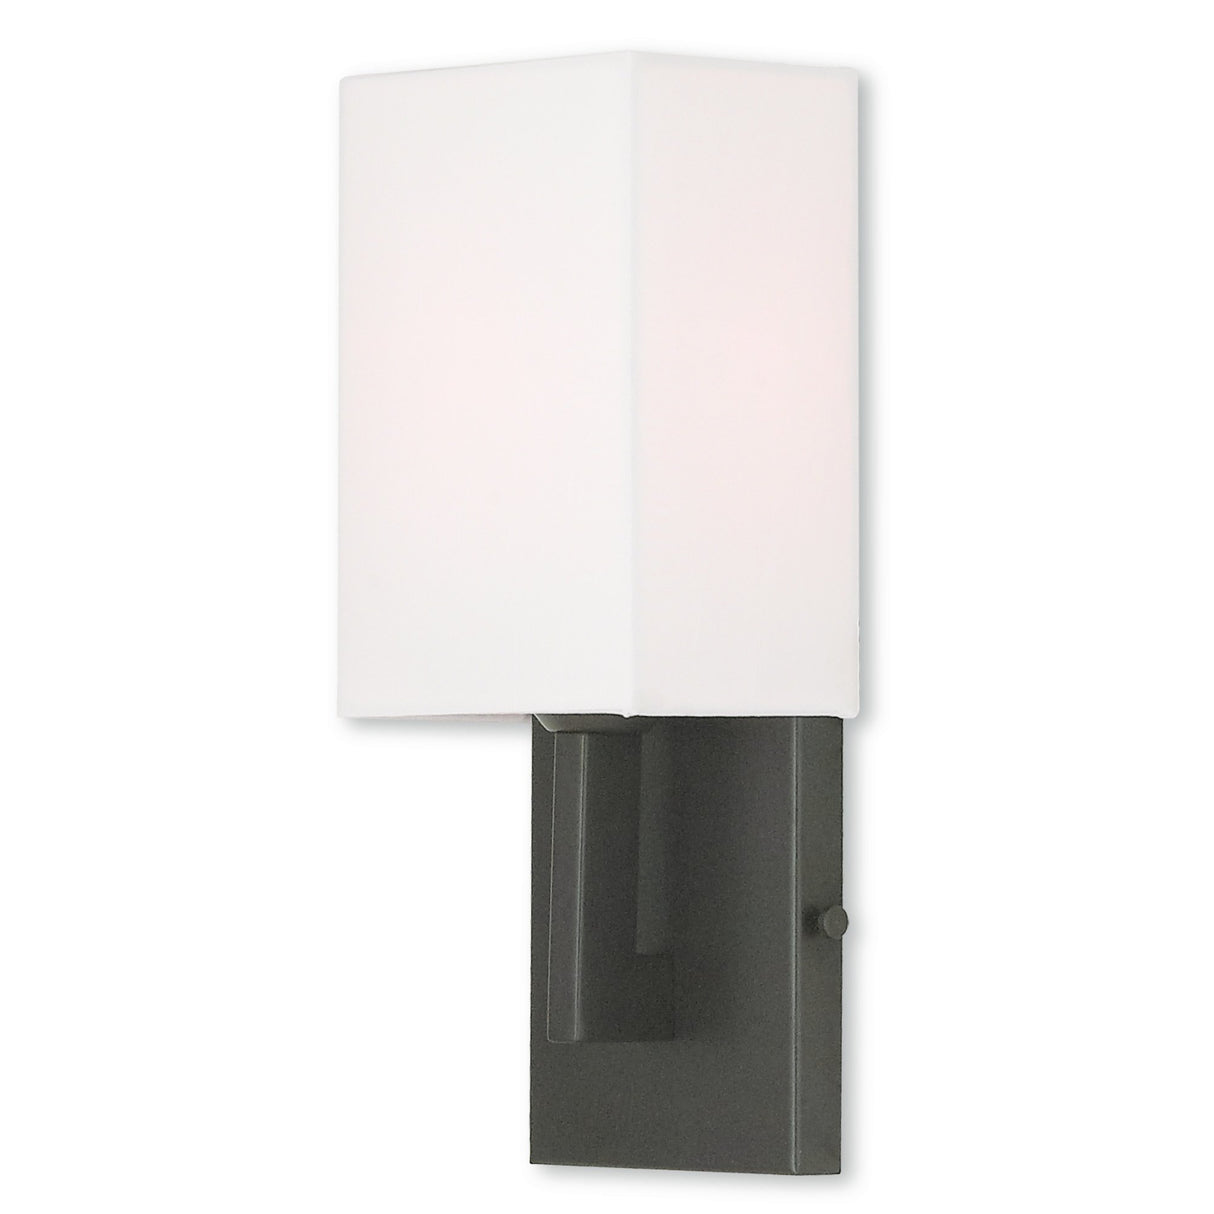 Livex 51101-07 Transitional One Light Wall Sconce from Hollborn Collection in Bronze/Dark Finish